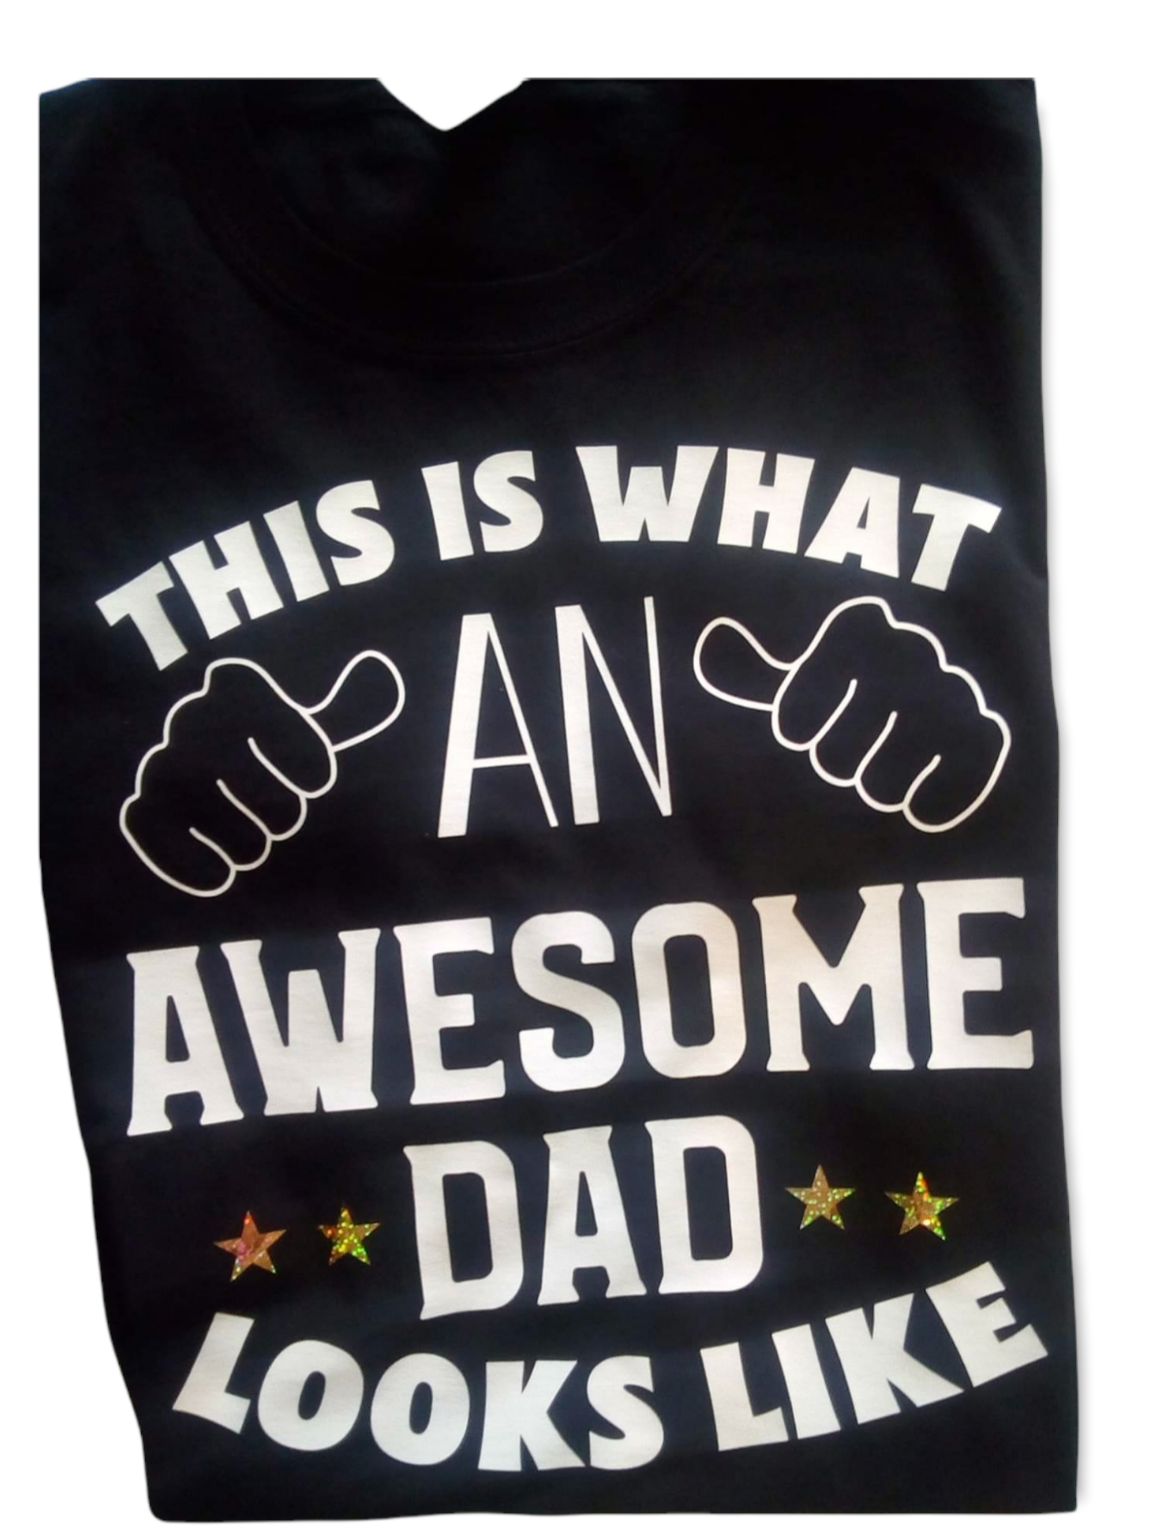 Awesome dad t shirt